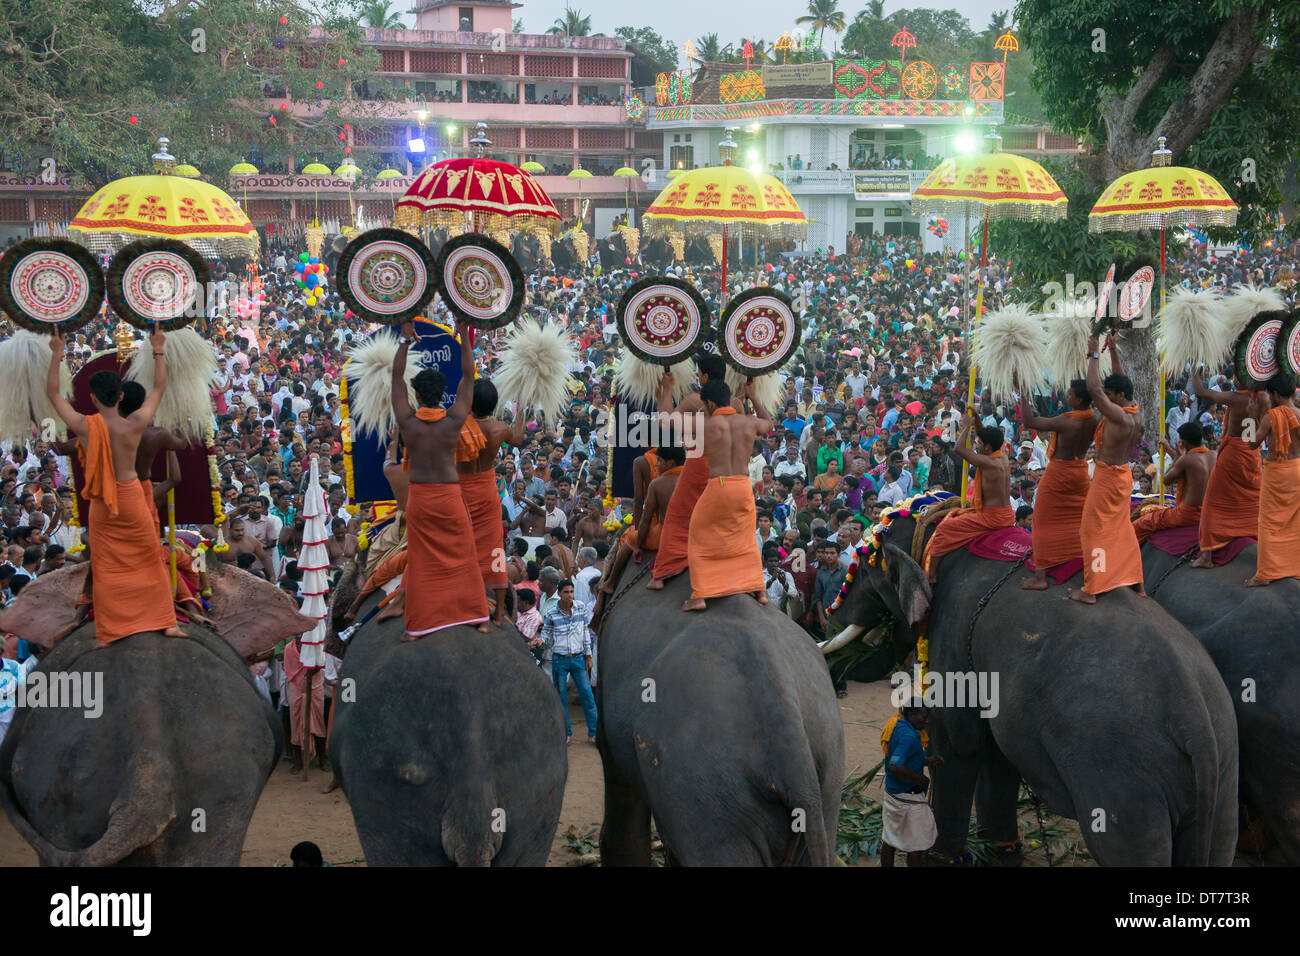 Priests waiving Aalavattom fans on elephant back at night in front of large crowds of pilgrims at the Goureeswara Temple Festival, Cherai, near Kochi (Cochin), Kerala, India Stock Photo